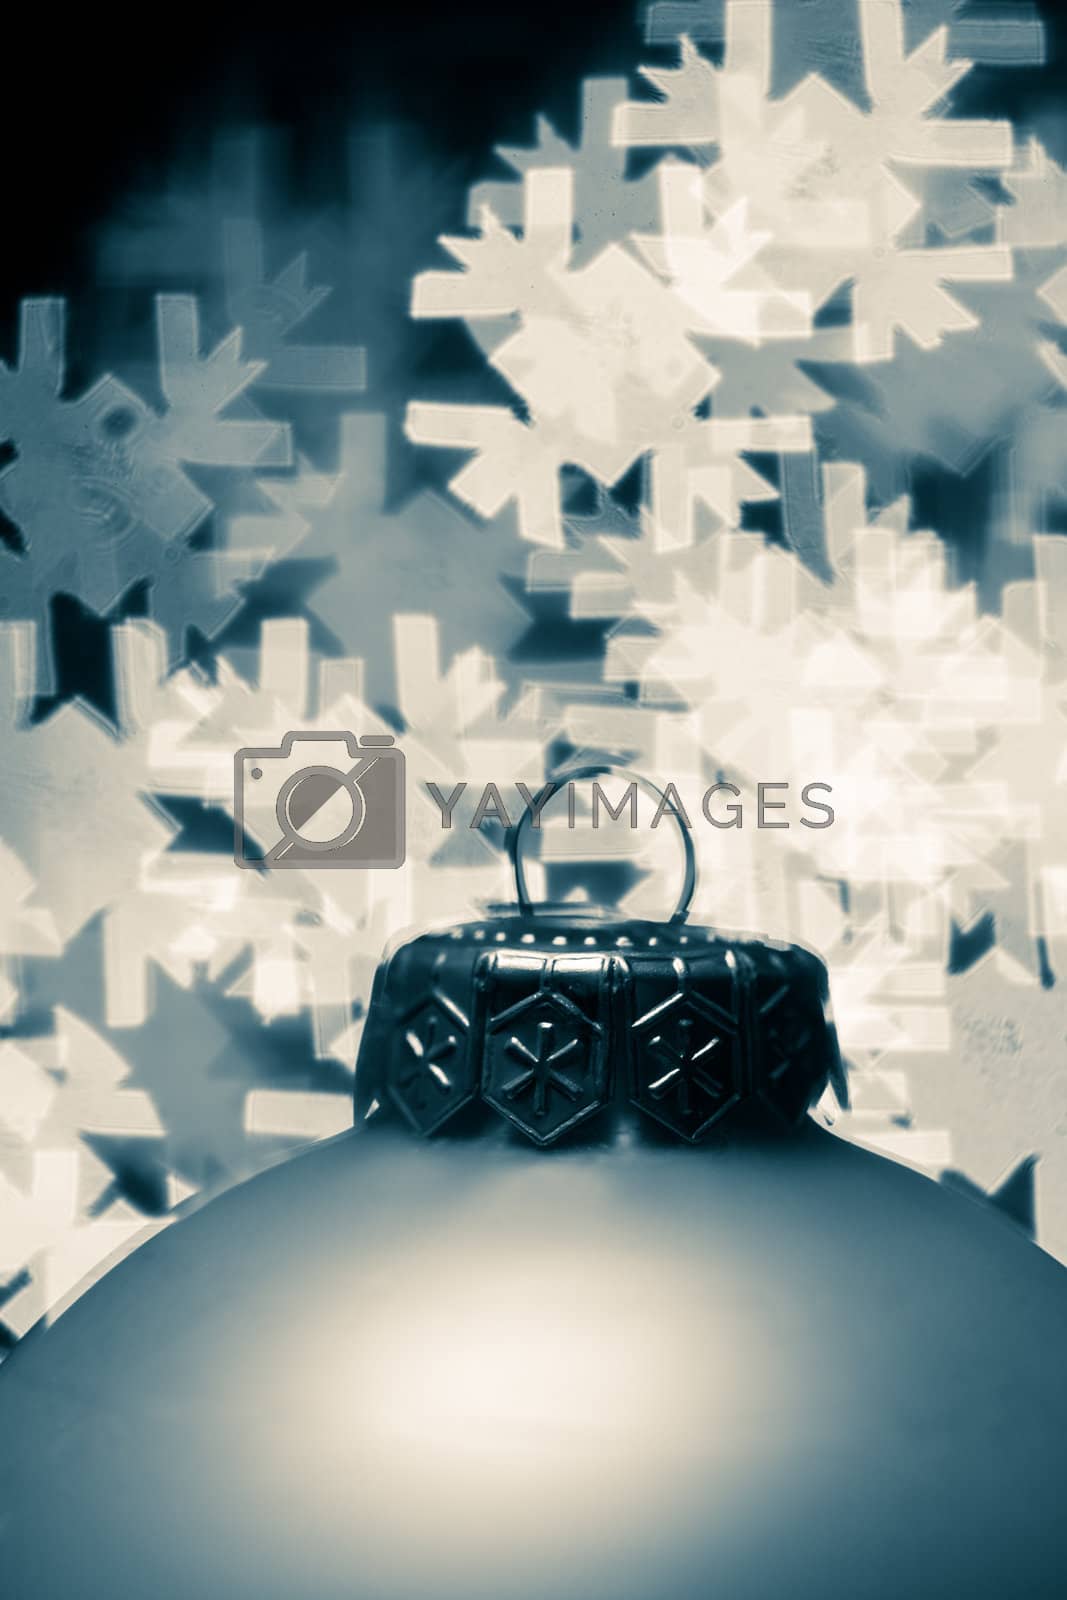 Royalty free image of Christmas theme by naumoid